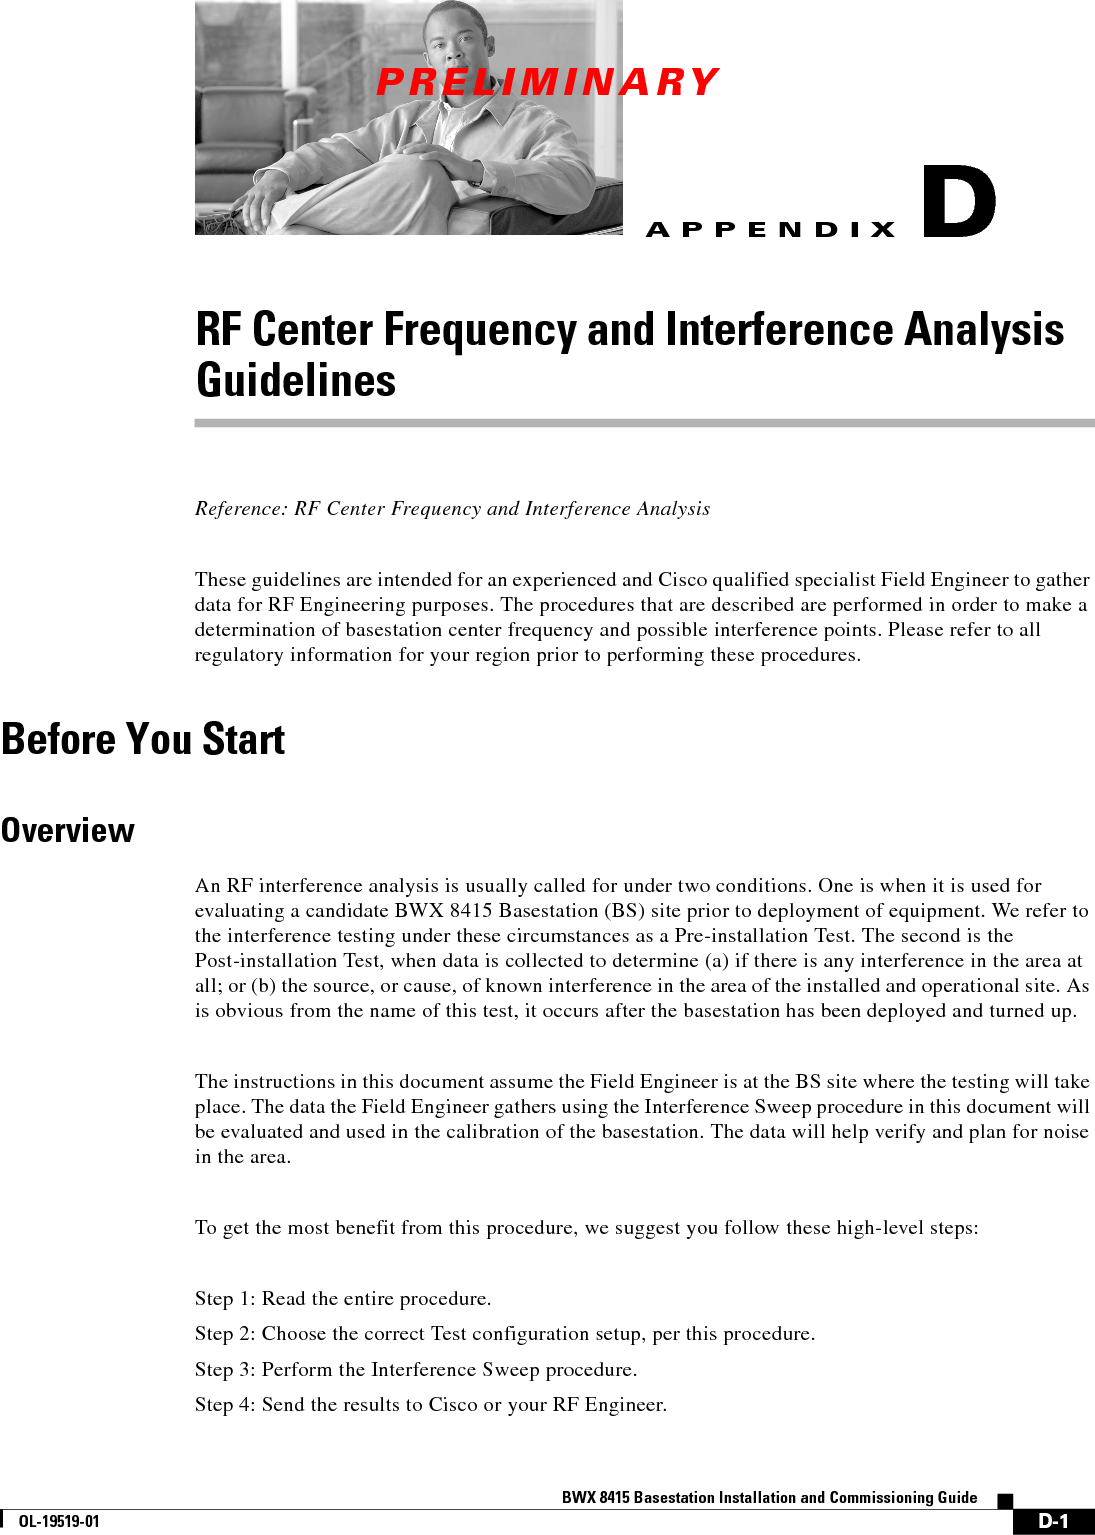 PRELIMINARYD-1BWX 8415 Basestation Installation and Commissioning GuideOL-19519-01APPENDIXDRF Center Frequency and Interference Analysis GuidelinesReference: RF Center Frequency and Interference Analysis These guidelines are intended for an experienced and Cisco qualified specialist Field Engineer to gather data for RF Engineering purposes. The procedures that are described are performed in order to make a determination of basestation center frequency and possible interference points. Please refer to all regulatory information for your region prior to performing these procedures.Before You StartOverviewAn RF interference analysis is usually called for under two conditions. One is when it is used for evaluating a candidate BWX 8415 Basestation (BS) site prior to deployment of equipment. We refer to the interference testing under these circumstances as a Pre-installation Test. The second is the Post-installation Test, when data is collected to determine (a) if there is any interference in the area at all; or (b) the source, or cause, of known interference in the area of the installed and operational site. As is obvious from the name of this test, it occurs after the basestation has been deployed and turned up.The instructions in this document assume the Field Engineer is at the BS site where the testing will take place. The data the Field Engineer gathers using the Interference Sweep procedure in this document will be evaluated and used in the calibration of the basestation. The data will help verify and plan for noise in the area.To get the most benefit from this procedure, we suggest you follow these high-level steps:Step 1: Read the entire procedure.Step 2: Choose the correct Test configuration setup, per this procedure.Step 3: Perform the Interference Sweep procedure.Step 4: Send the results to Cisco or your RF Engineer.